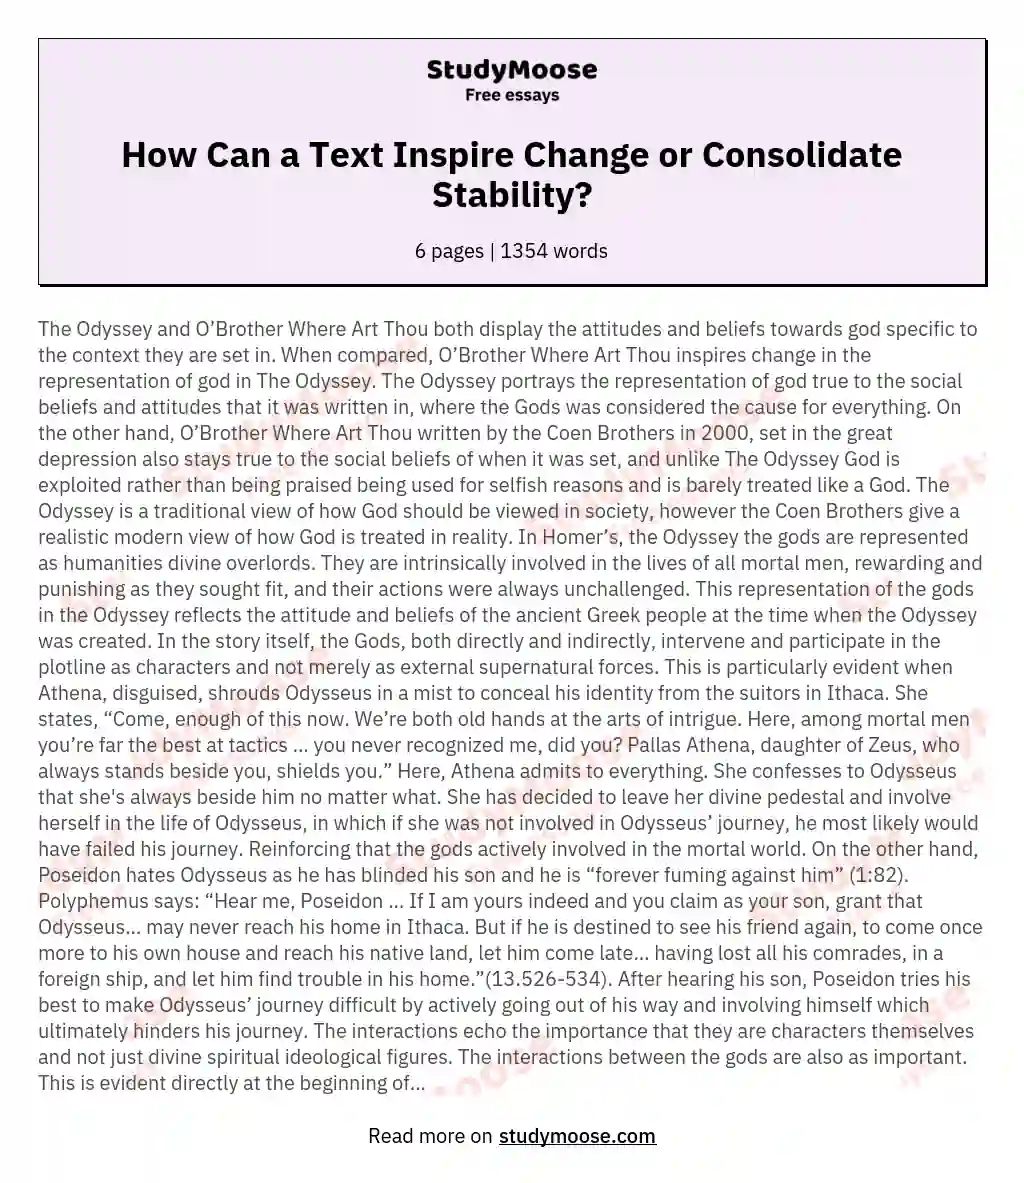 How Can a Text Inspire Change or Consolidate Stability? essay